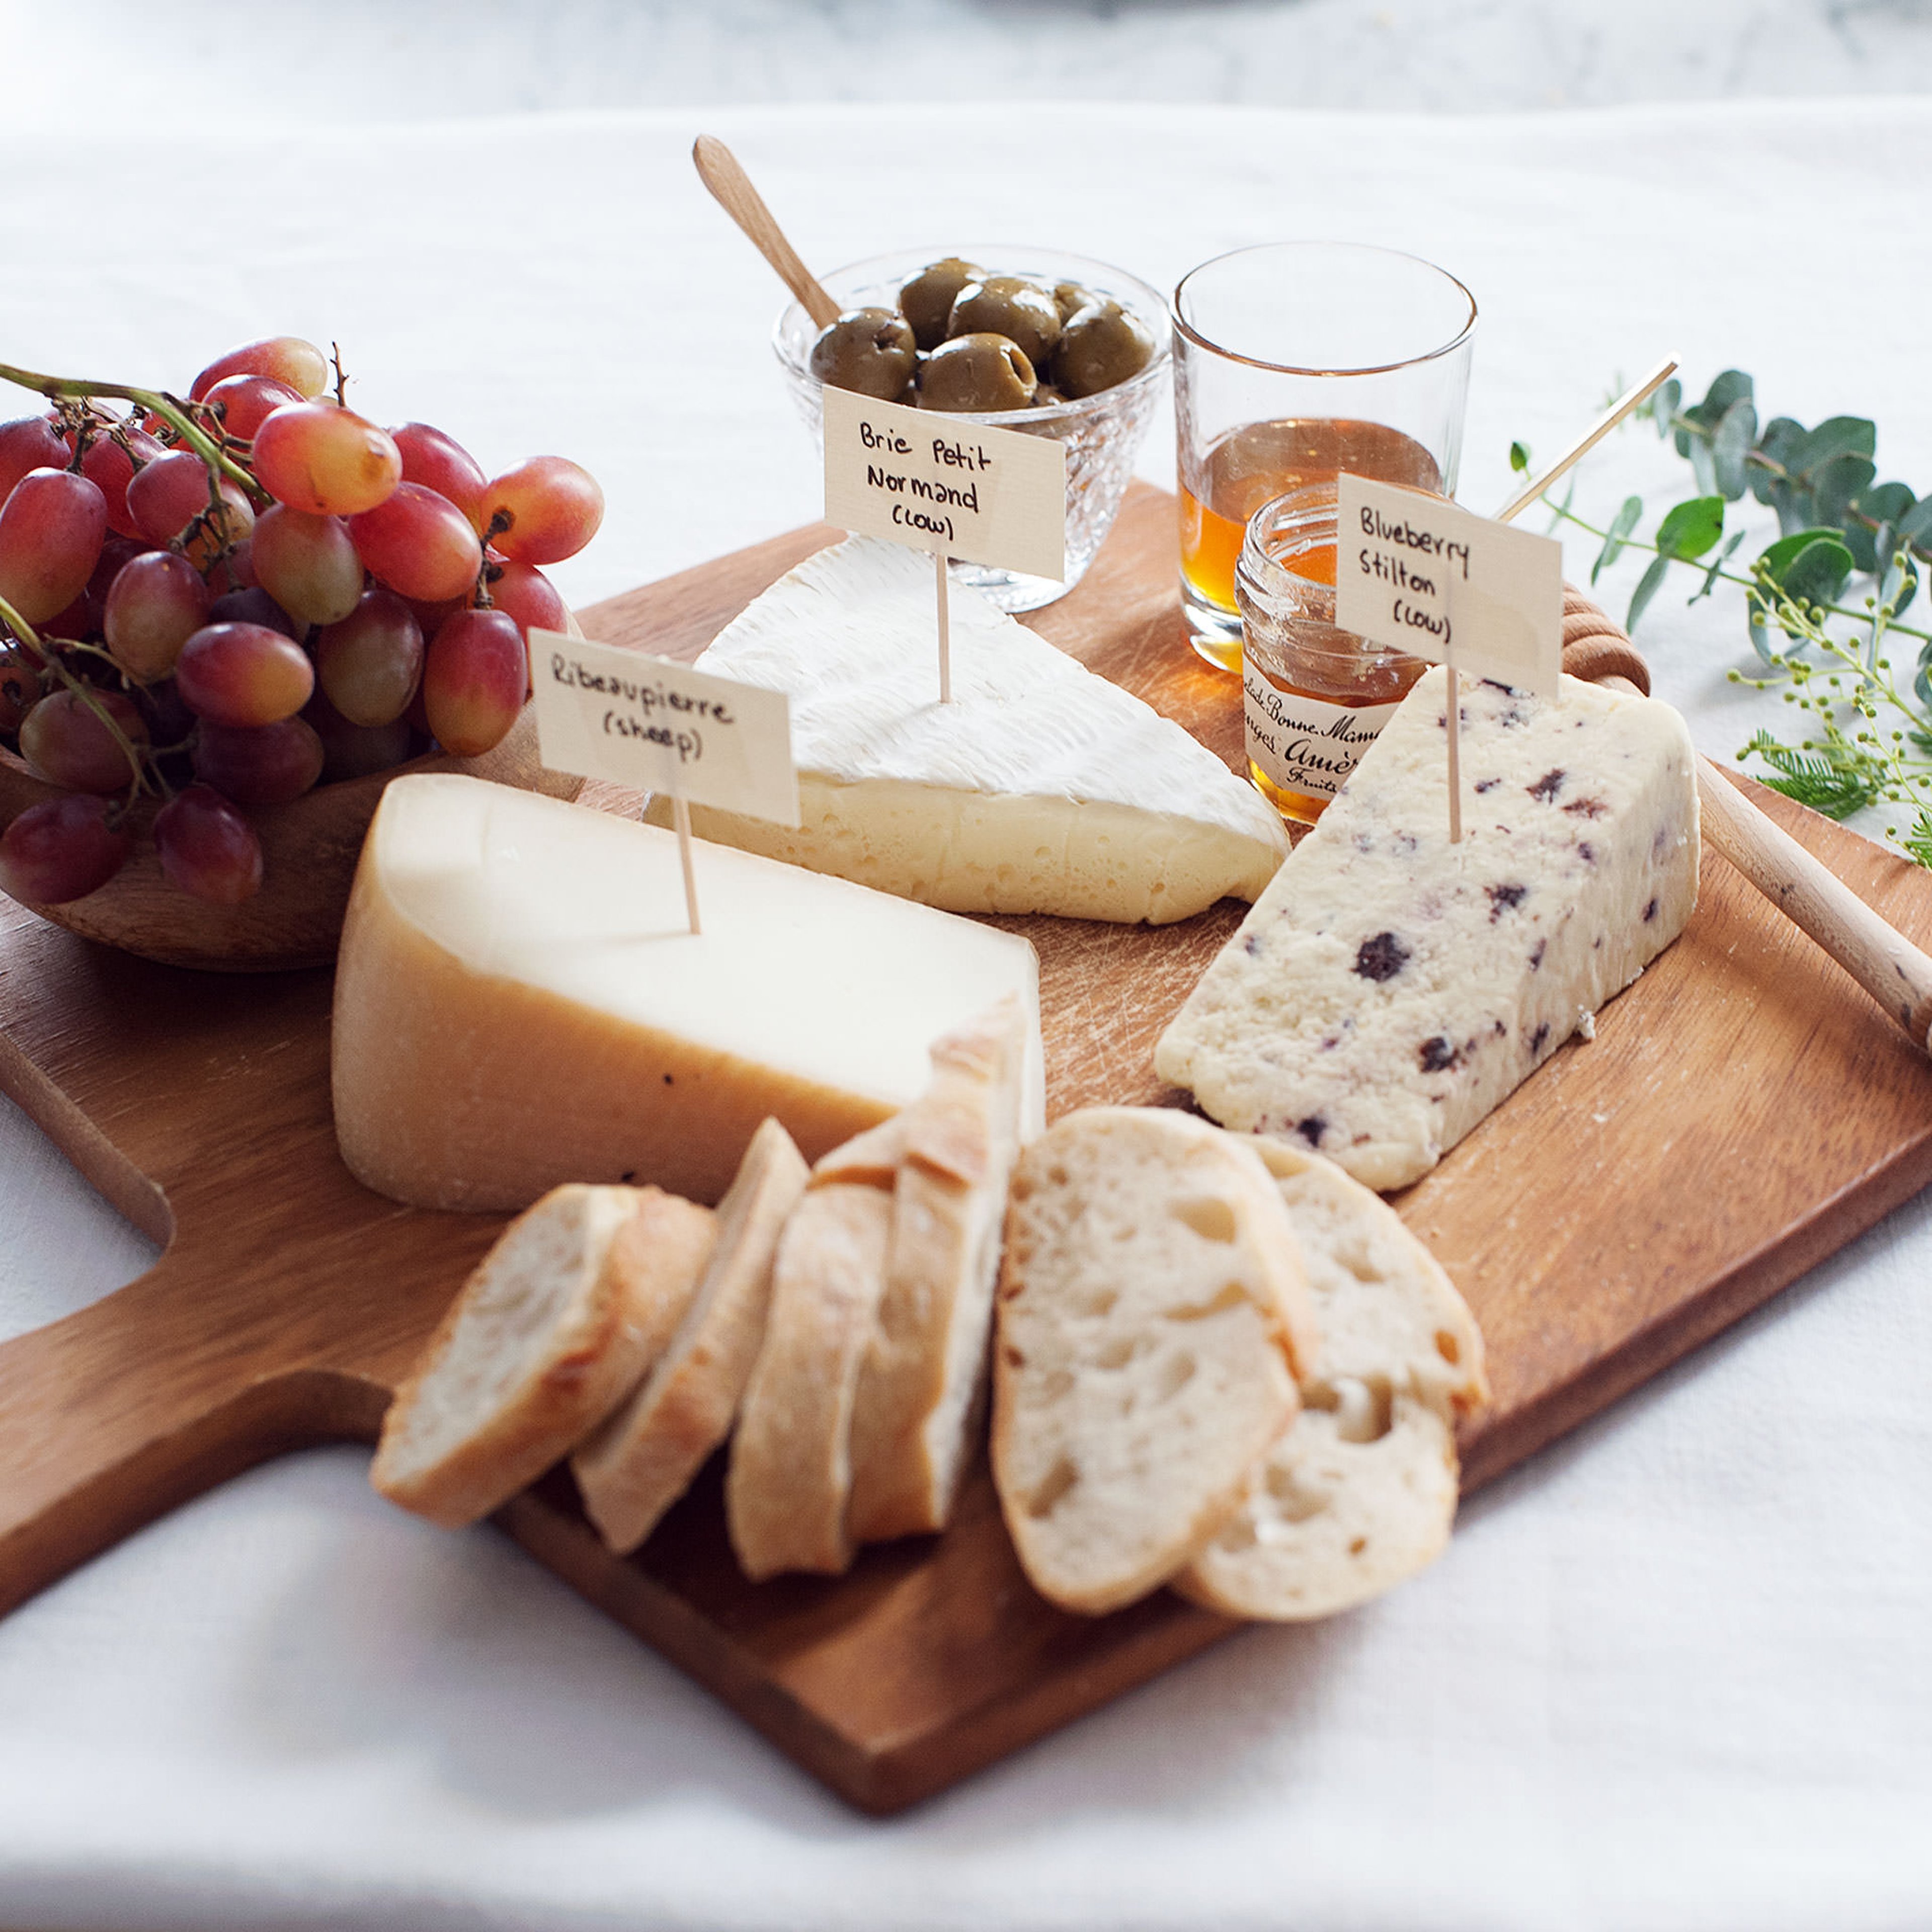 The Essential Elements of a Good Cheeseboard